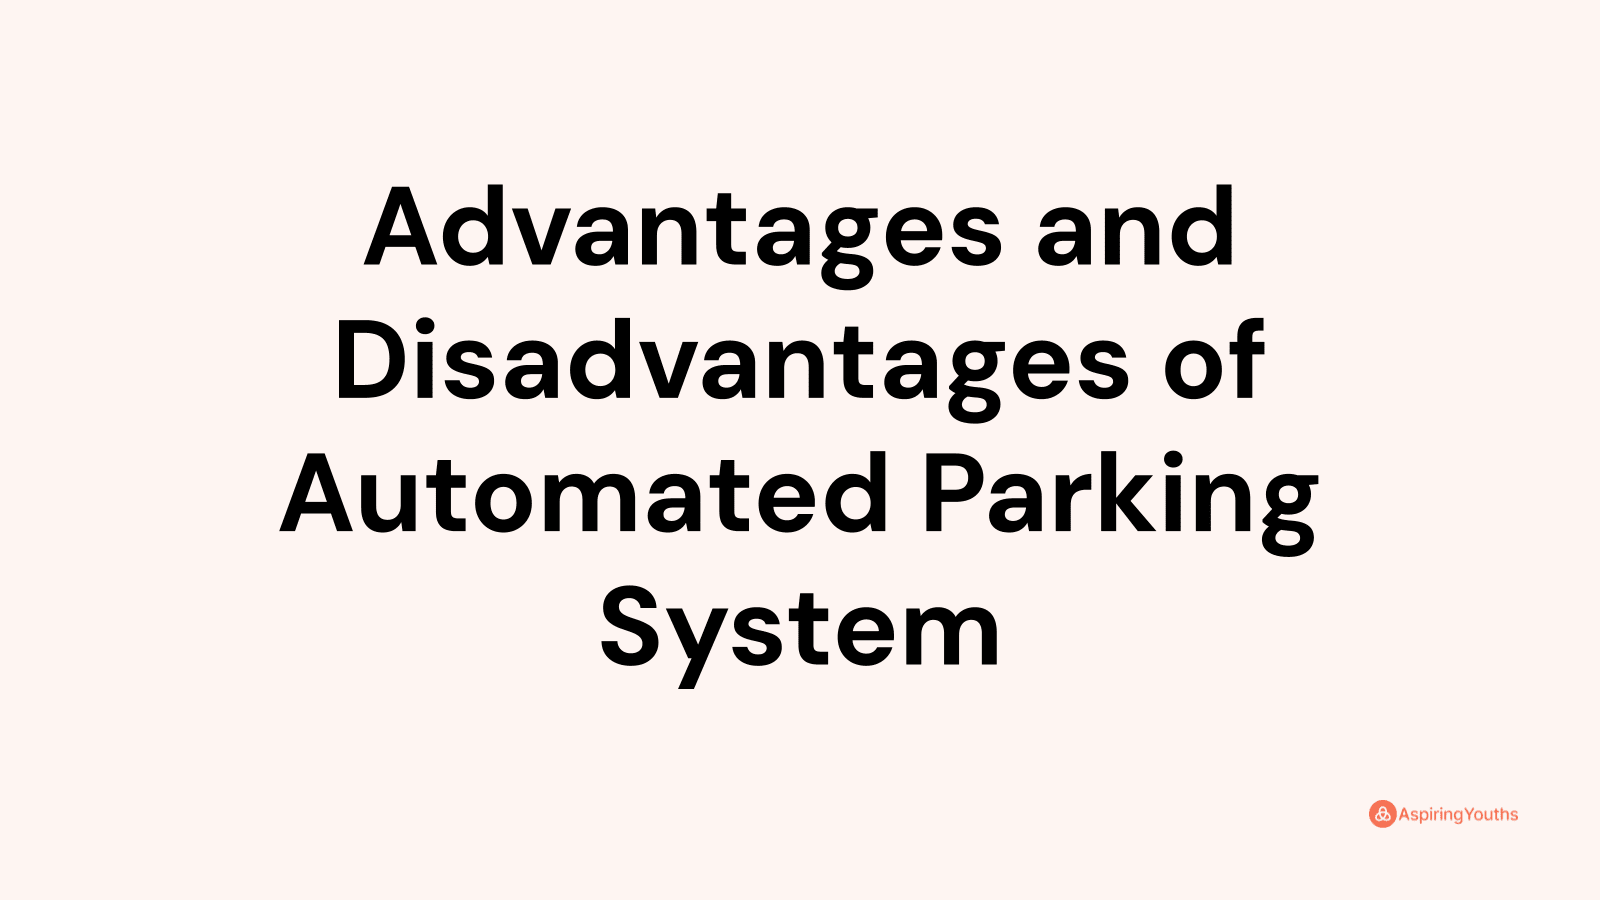 Advantages and disadvantages of Automated Parking System